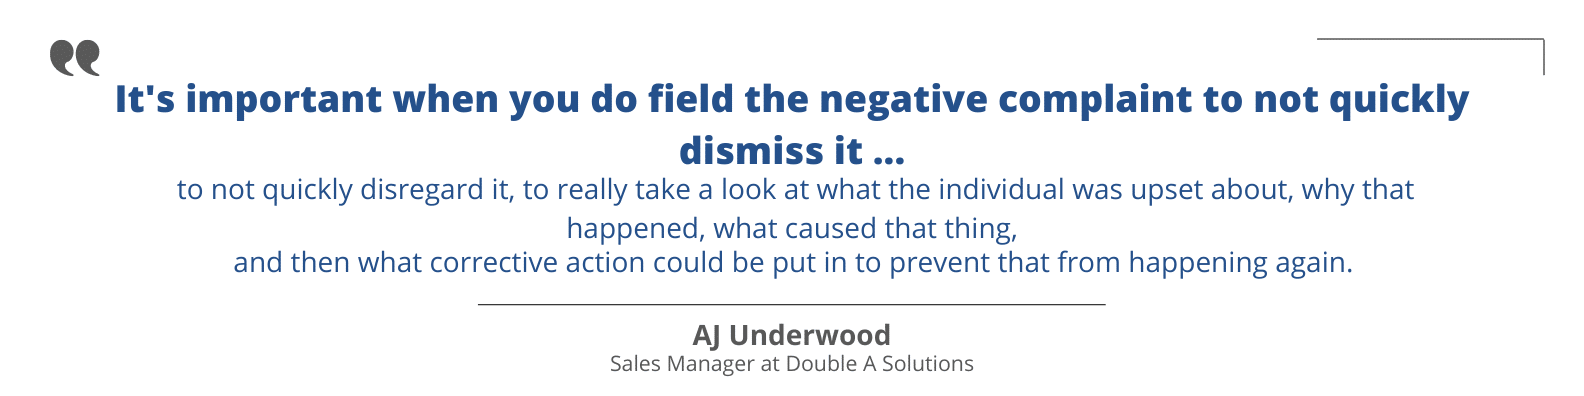 Quote from Aj Underwood explaining how to handle negative complaints